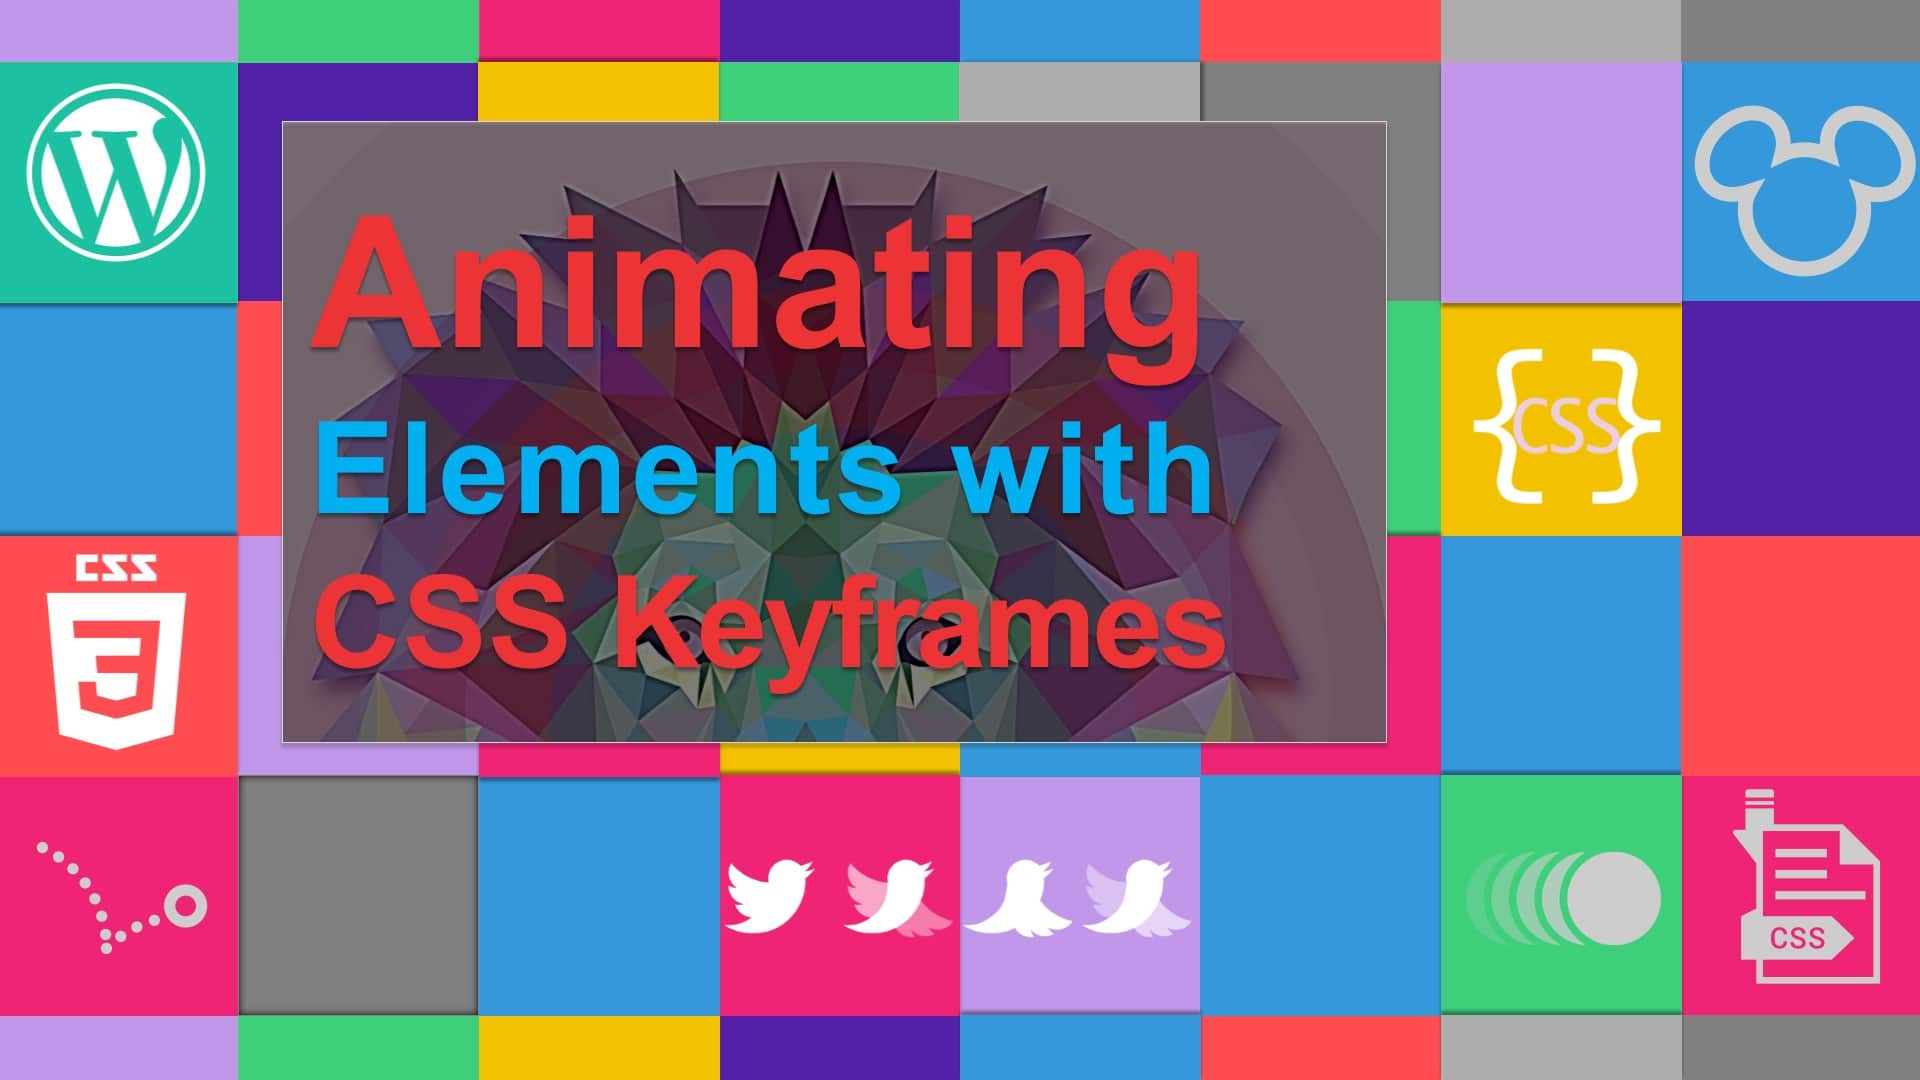 Animating elements with CSS Keyframes